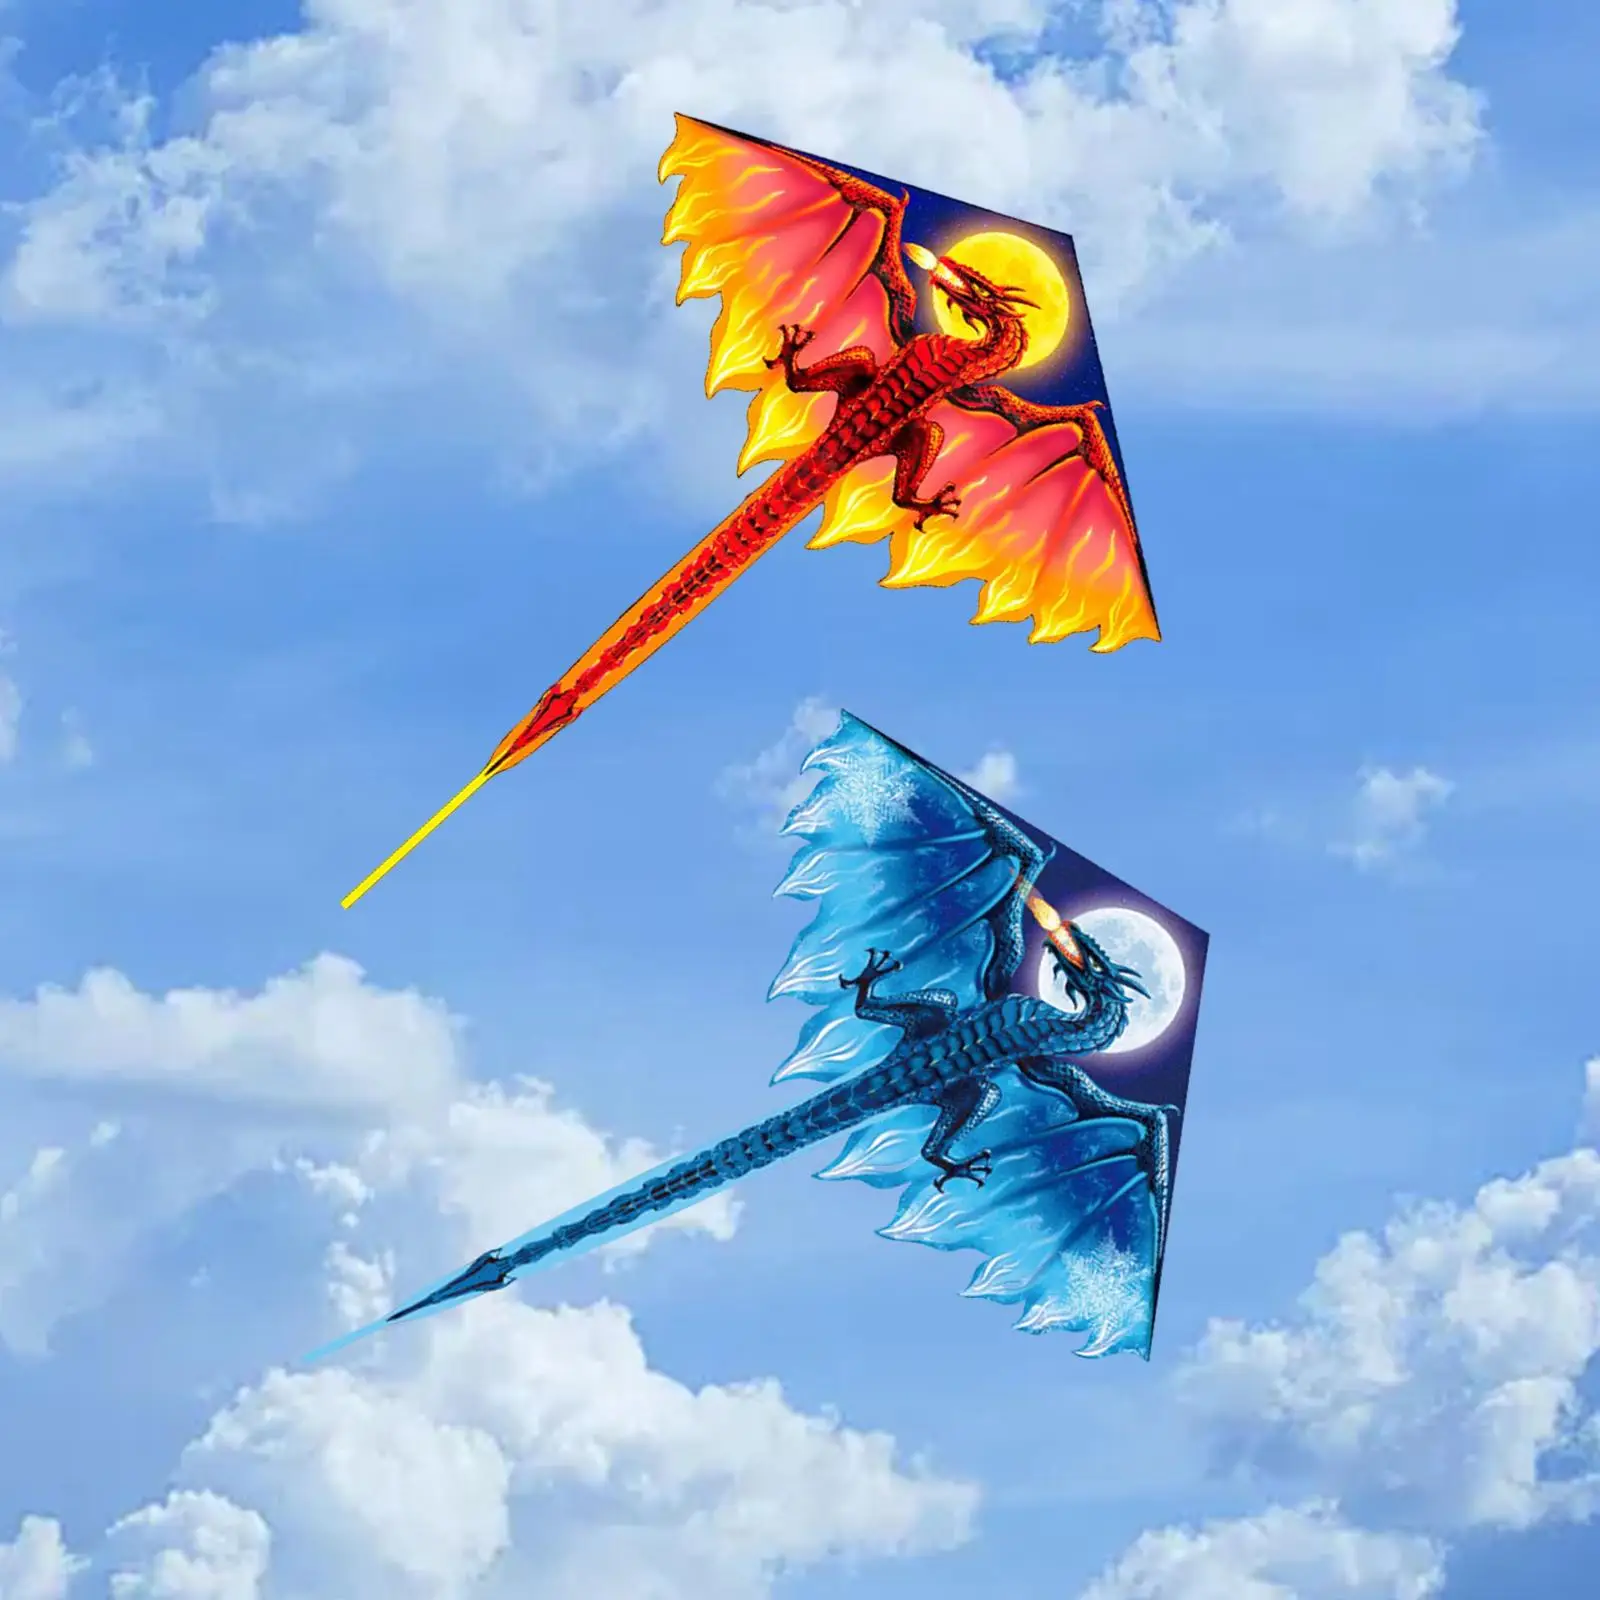 Large Spring Kite Easy to Fly Funny Colorful 3D dragon Animal for Family Game Windy Day outdoor Beach